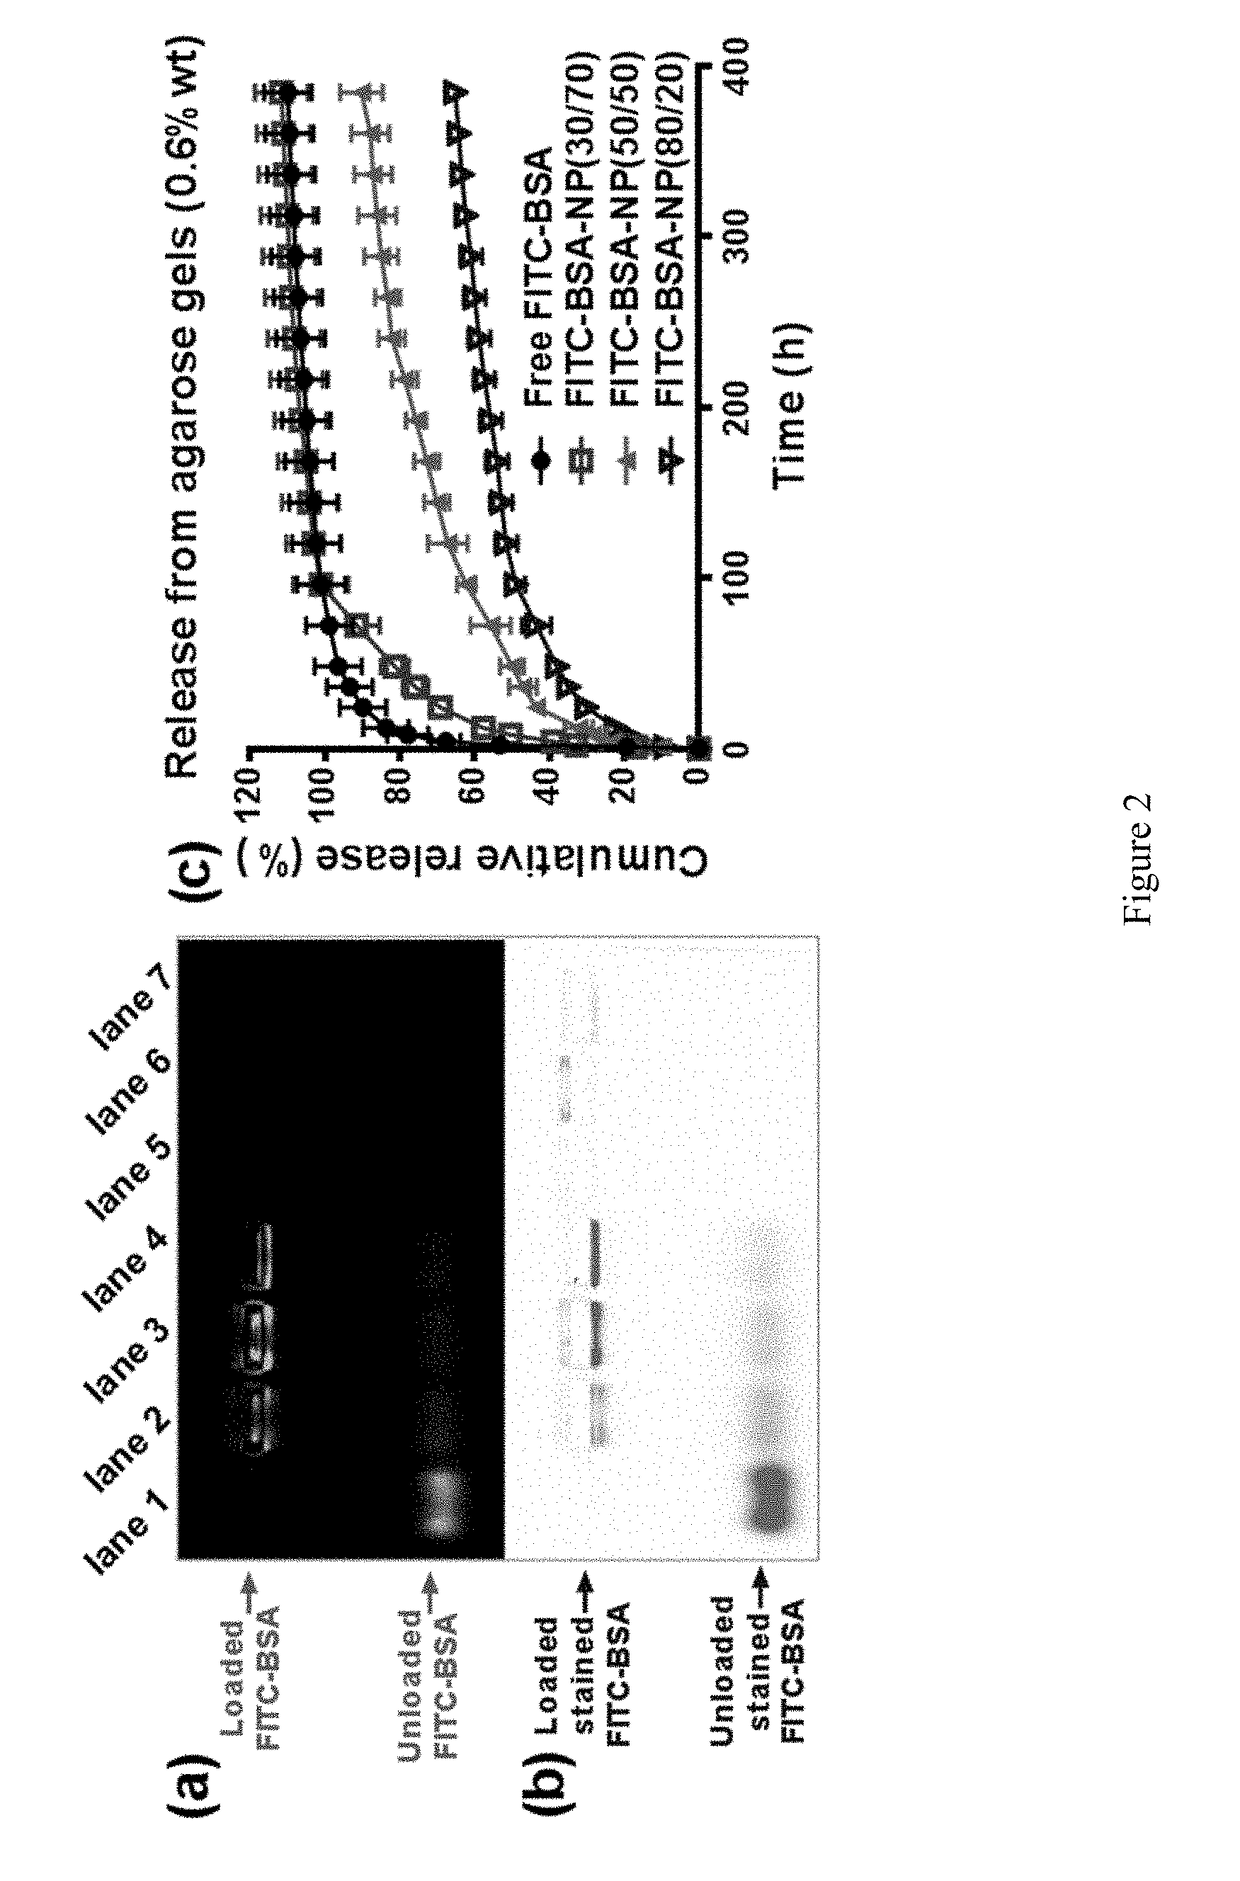 Lipidic compound-telodendrimer hybrid nanoparticles and methods of making and uses thereof